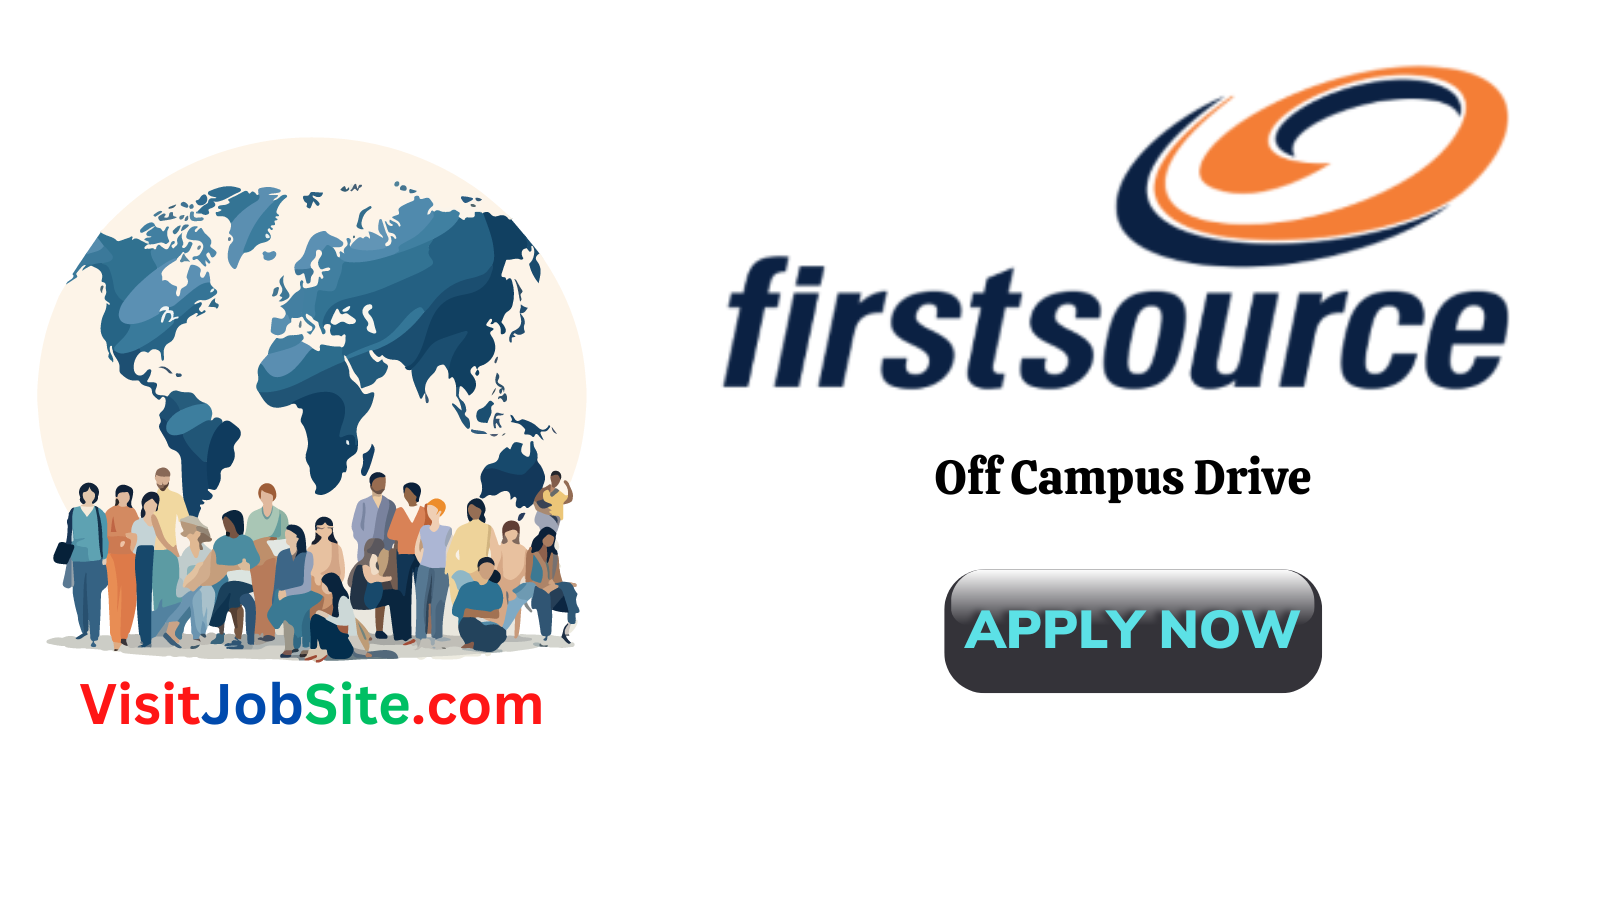 Firstsource Off Campus Drive